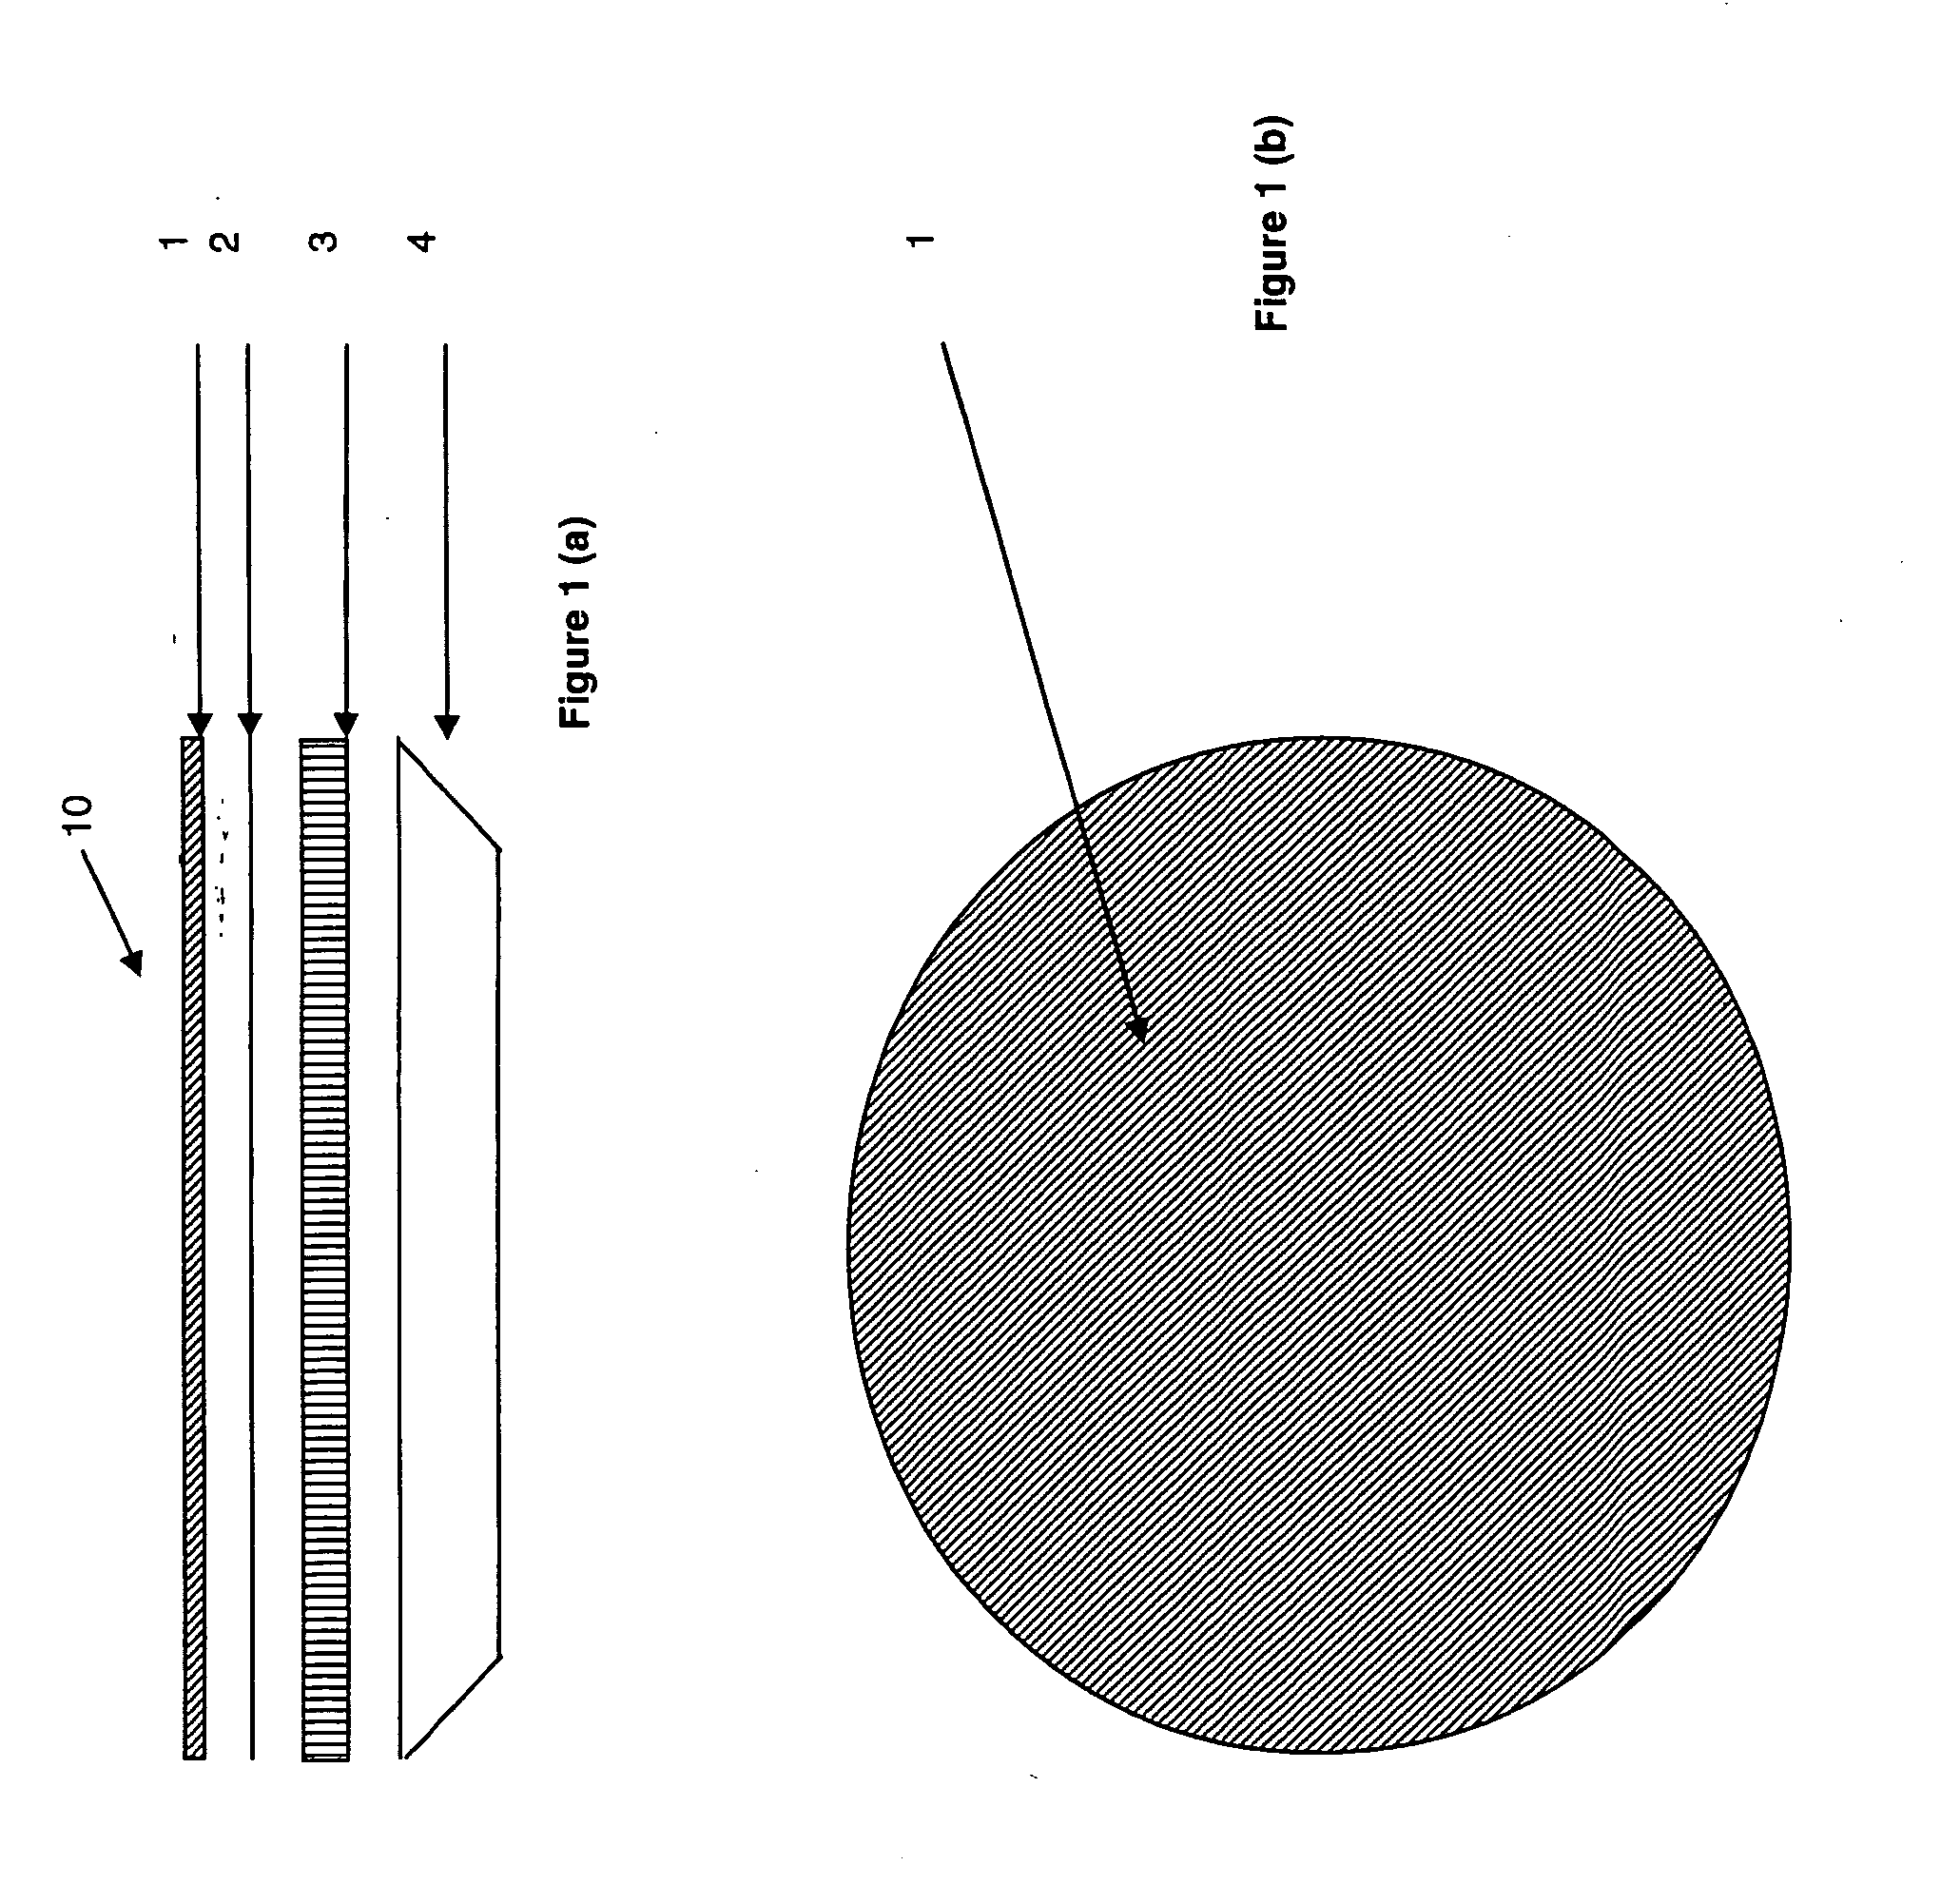 Clamp for use in processing semiconductor workpieces